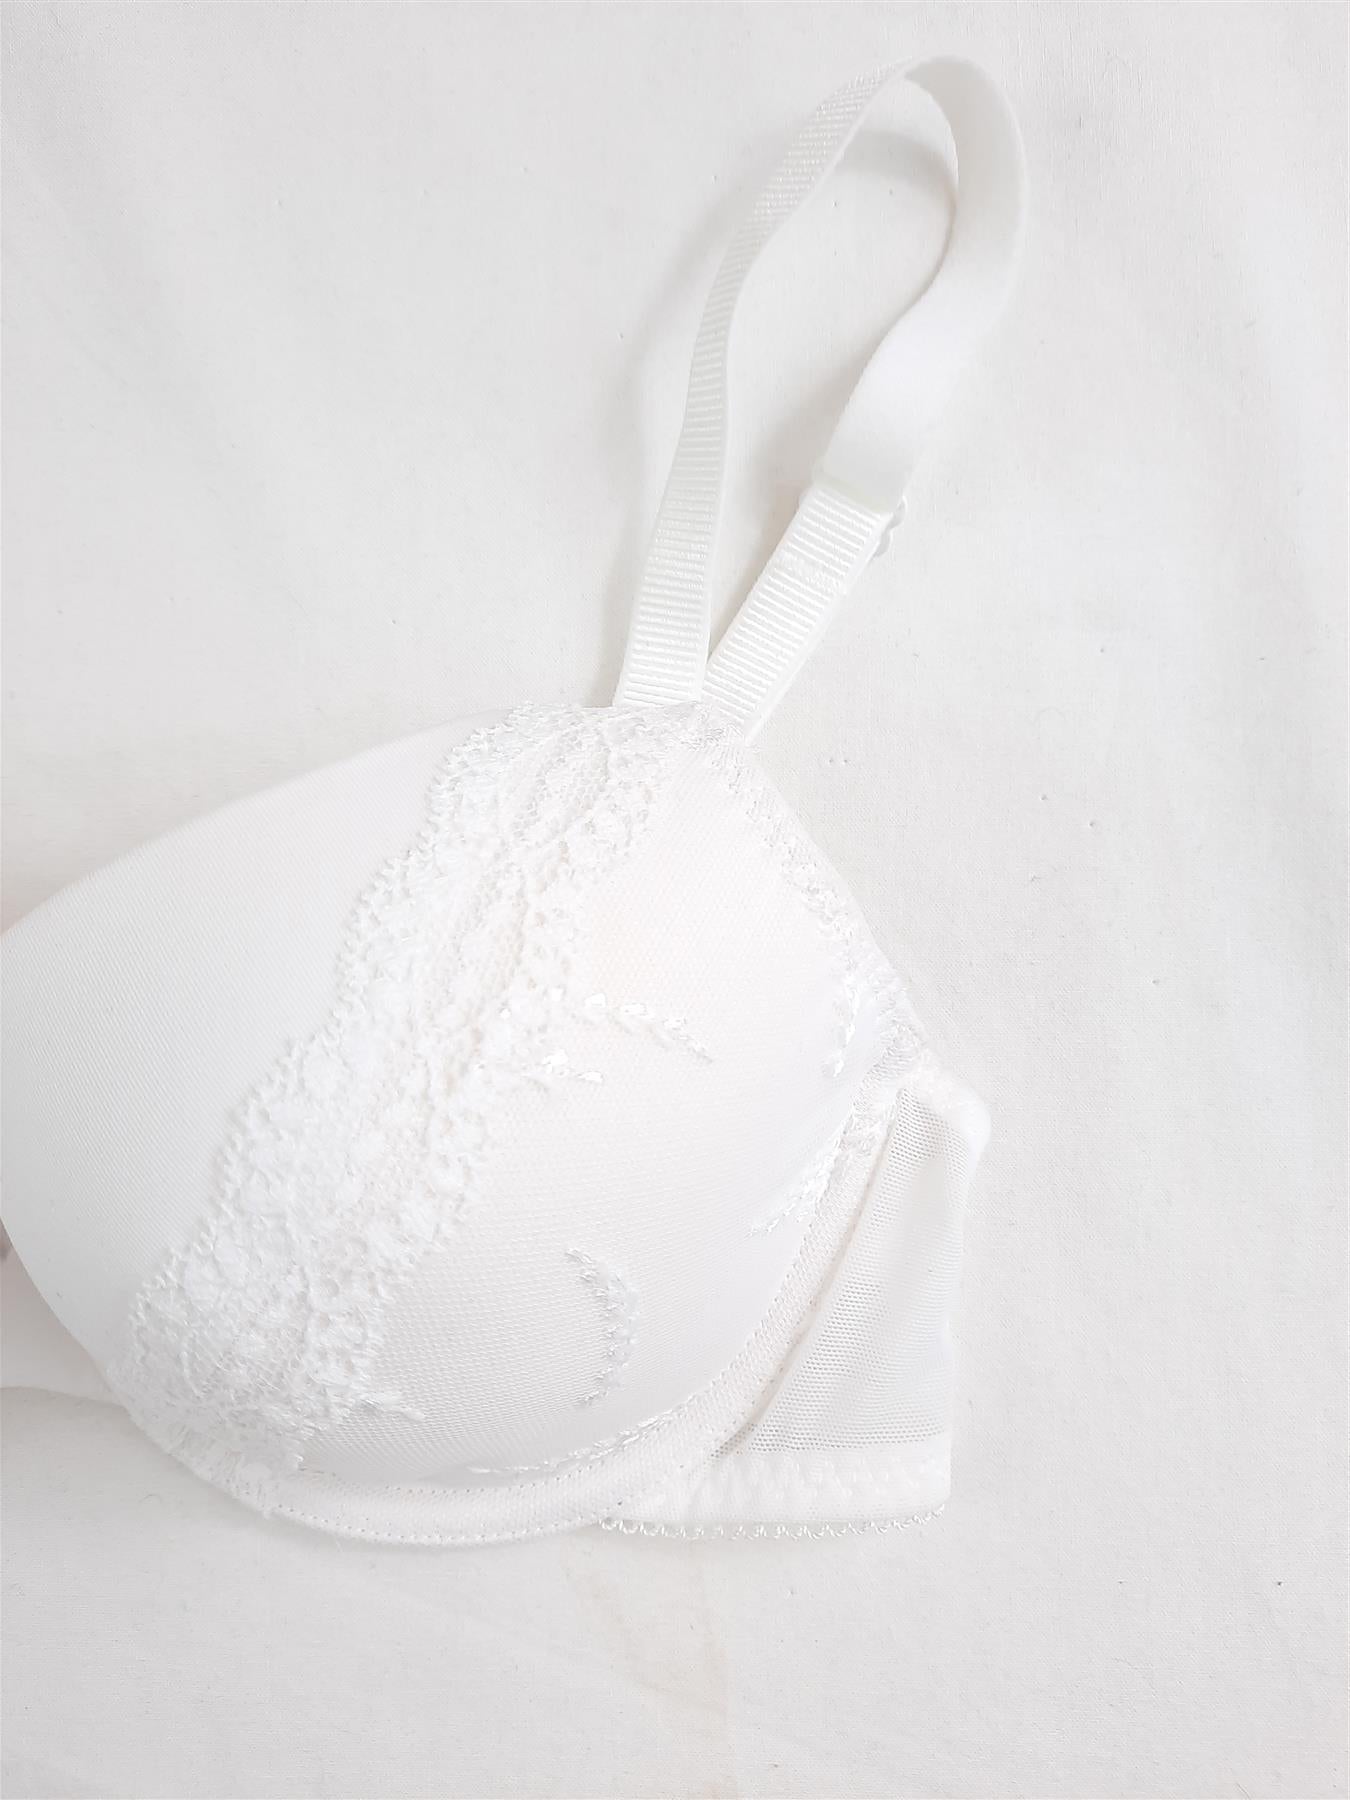 M S Underwired Bra Lightly Padded Lace Overlay Comfort White Shop Soiled New